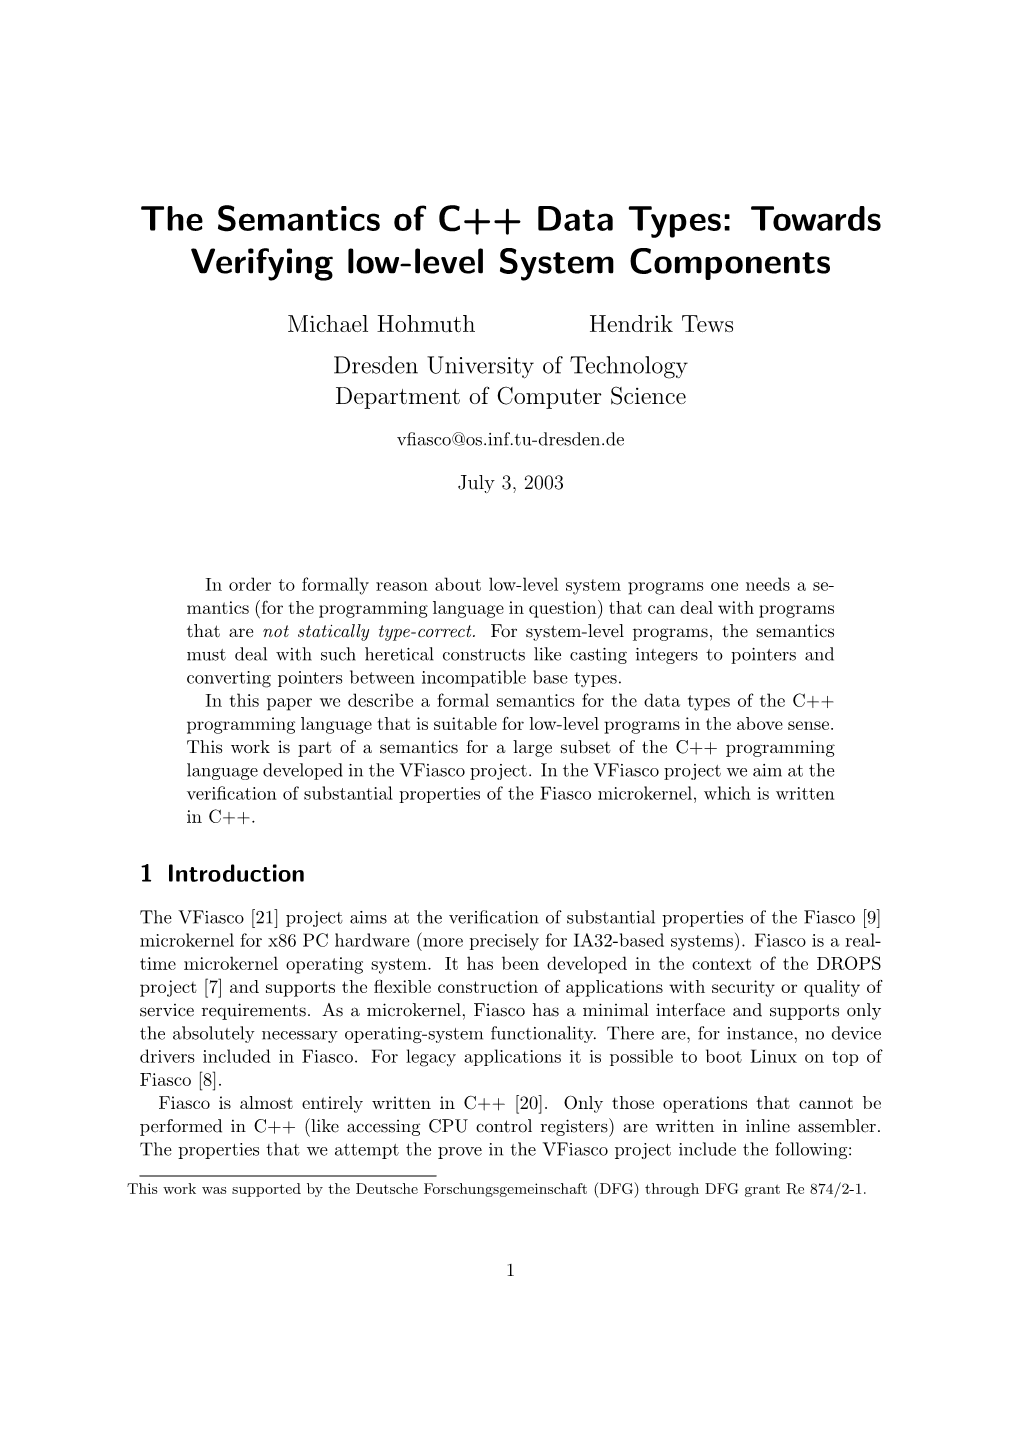 The Semantics of C++ Data Types: Towards Verifying Low-Level System Components